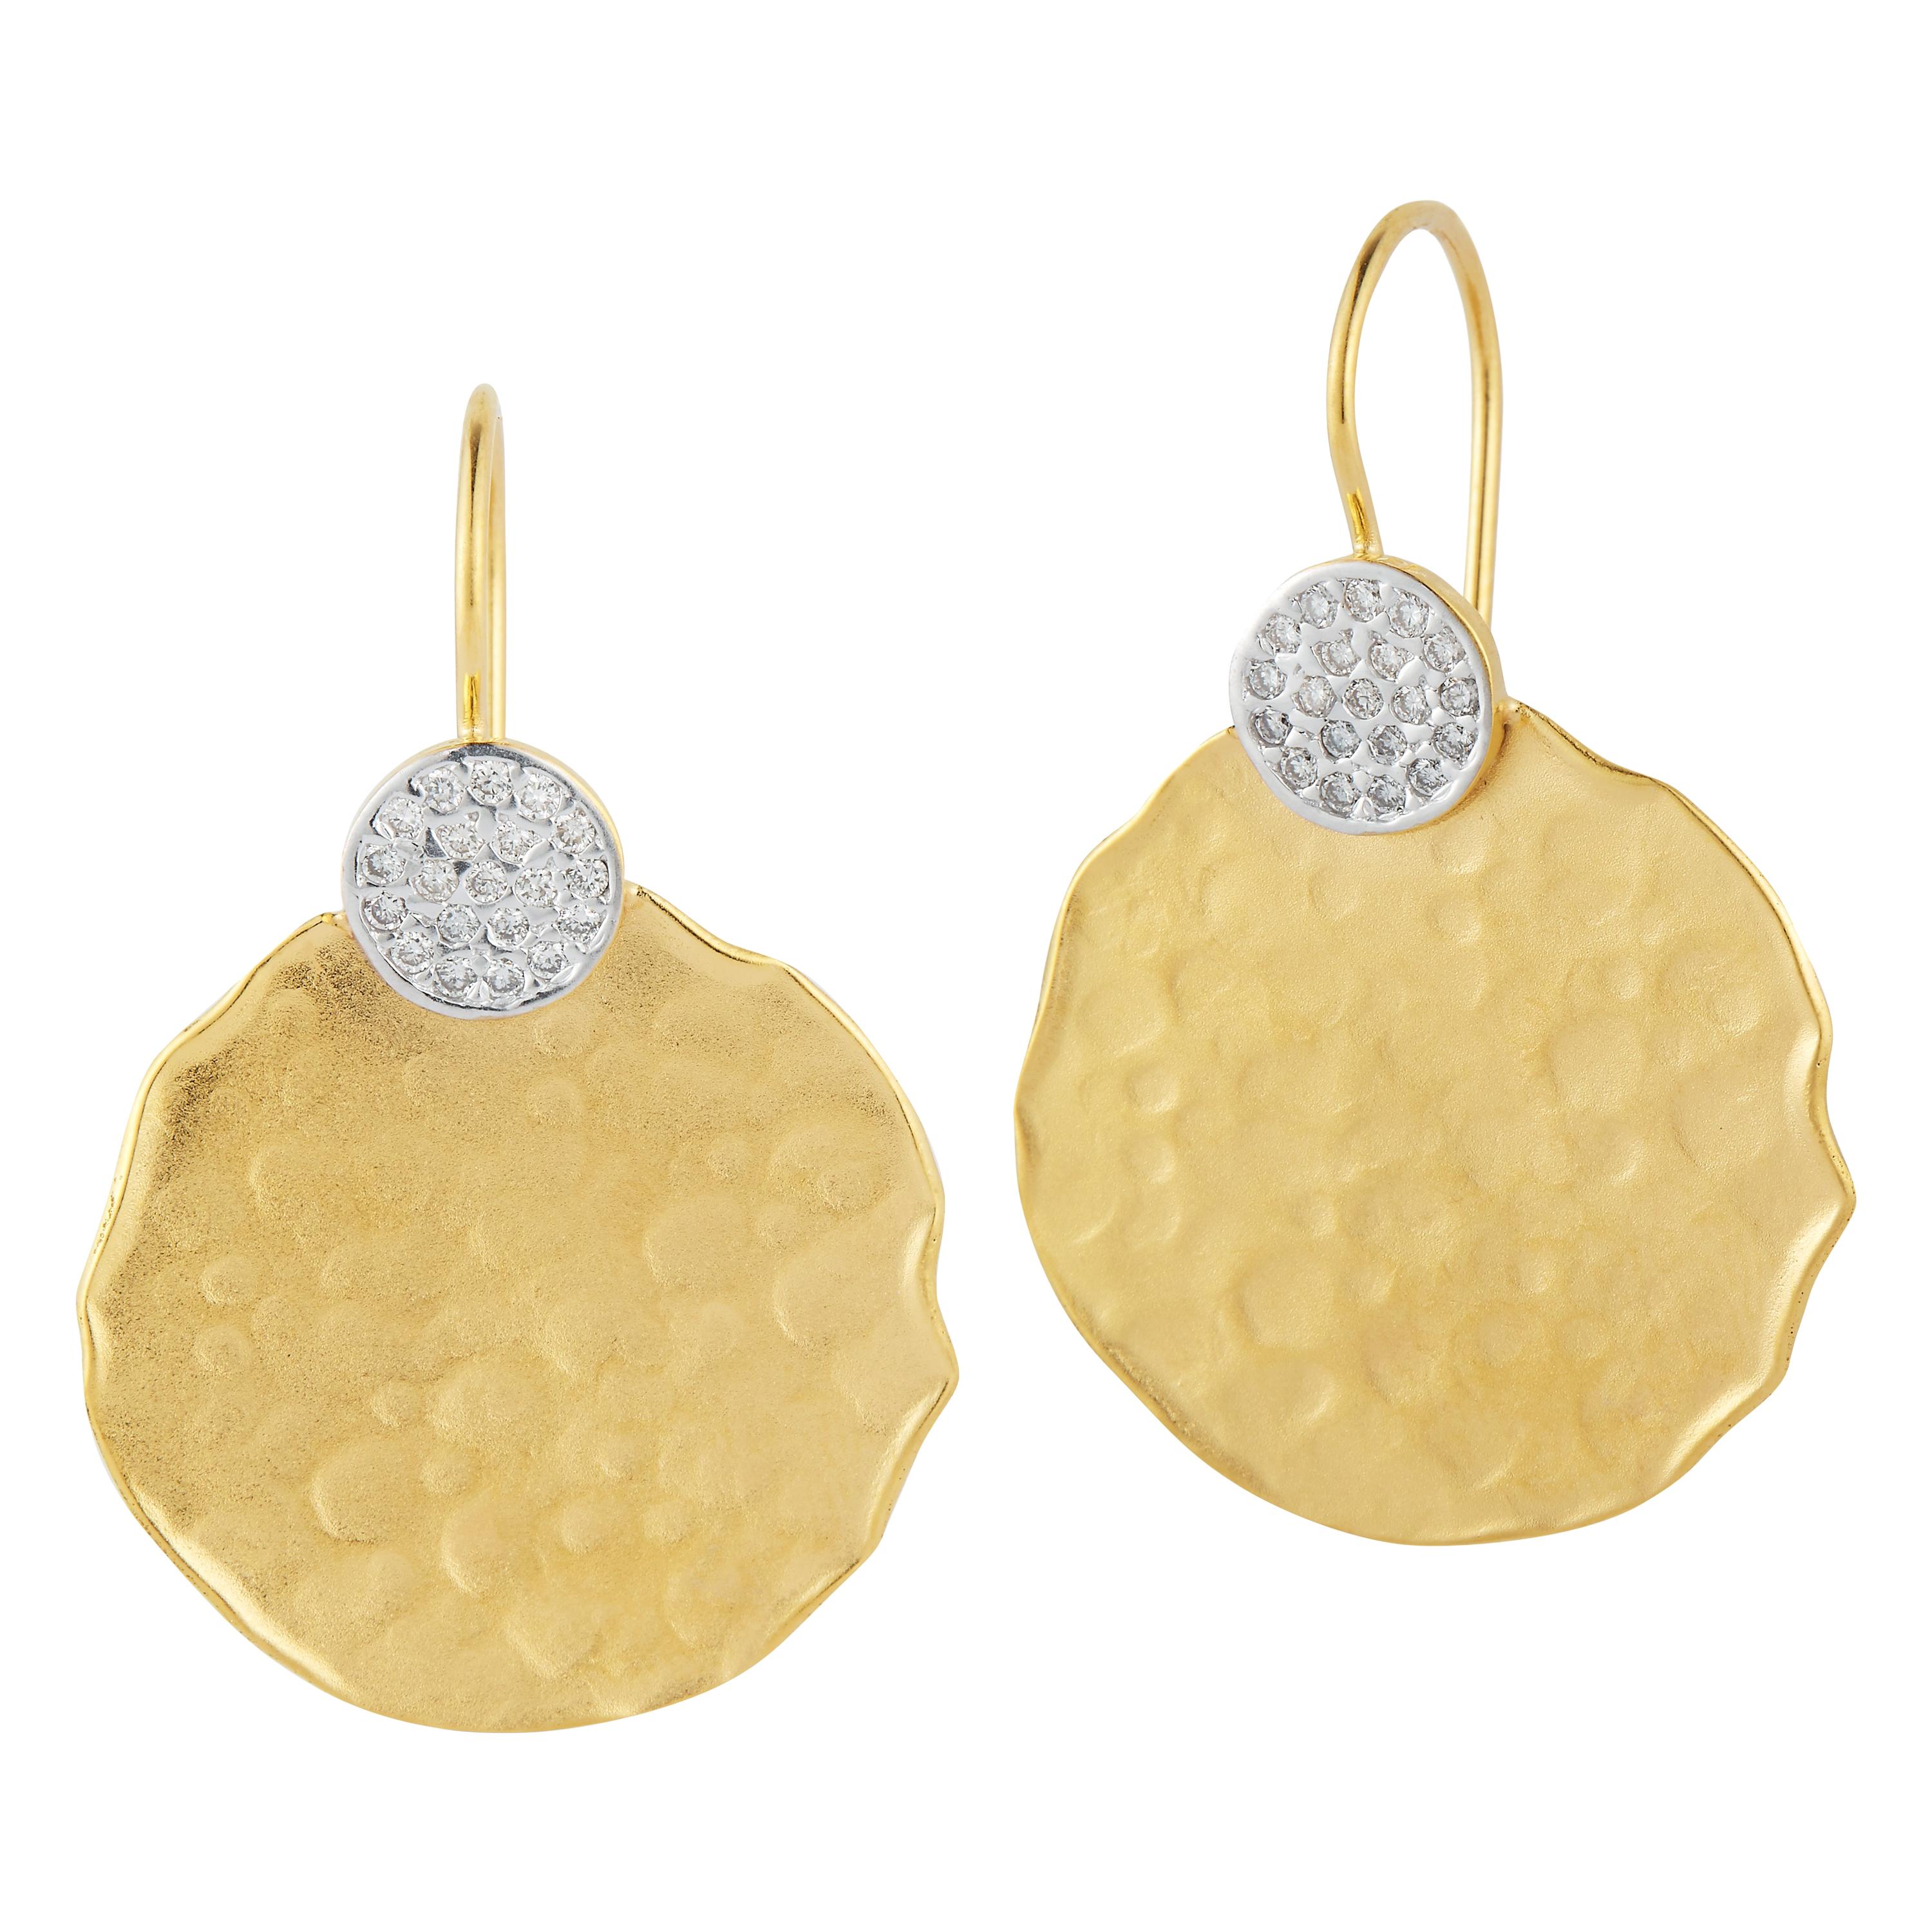 Handcrafted 14 Karat Yellow Gold Hammered Round-Shaped Earrings For Sale